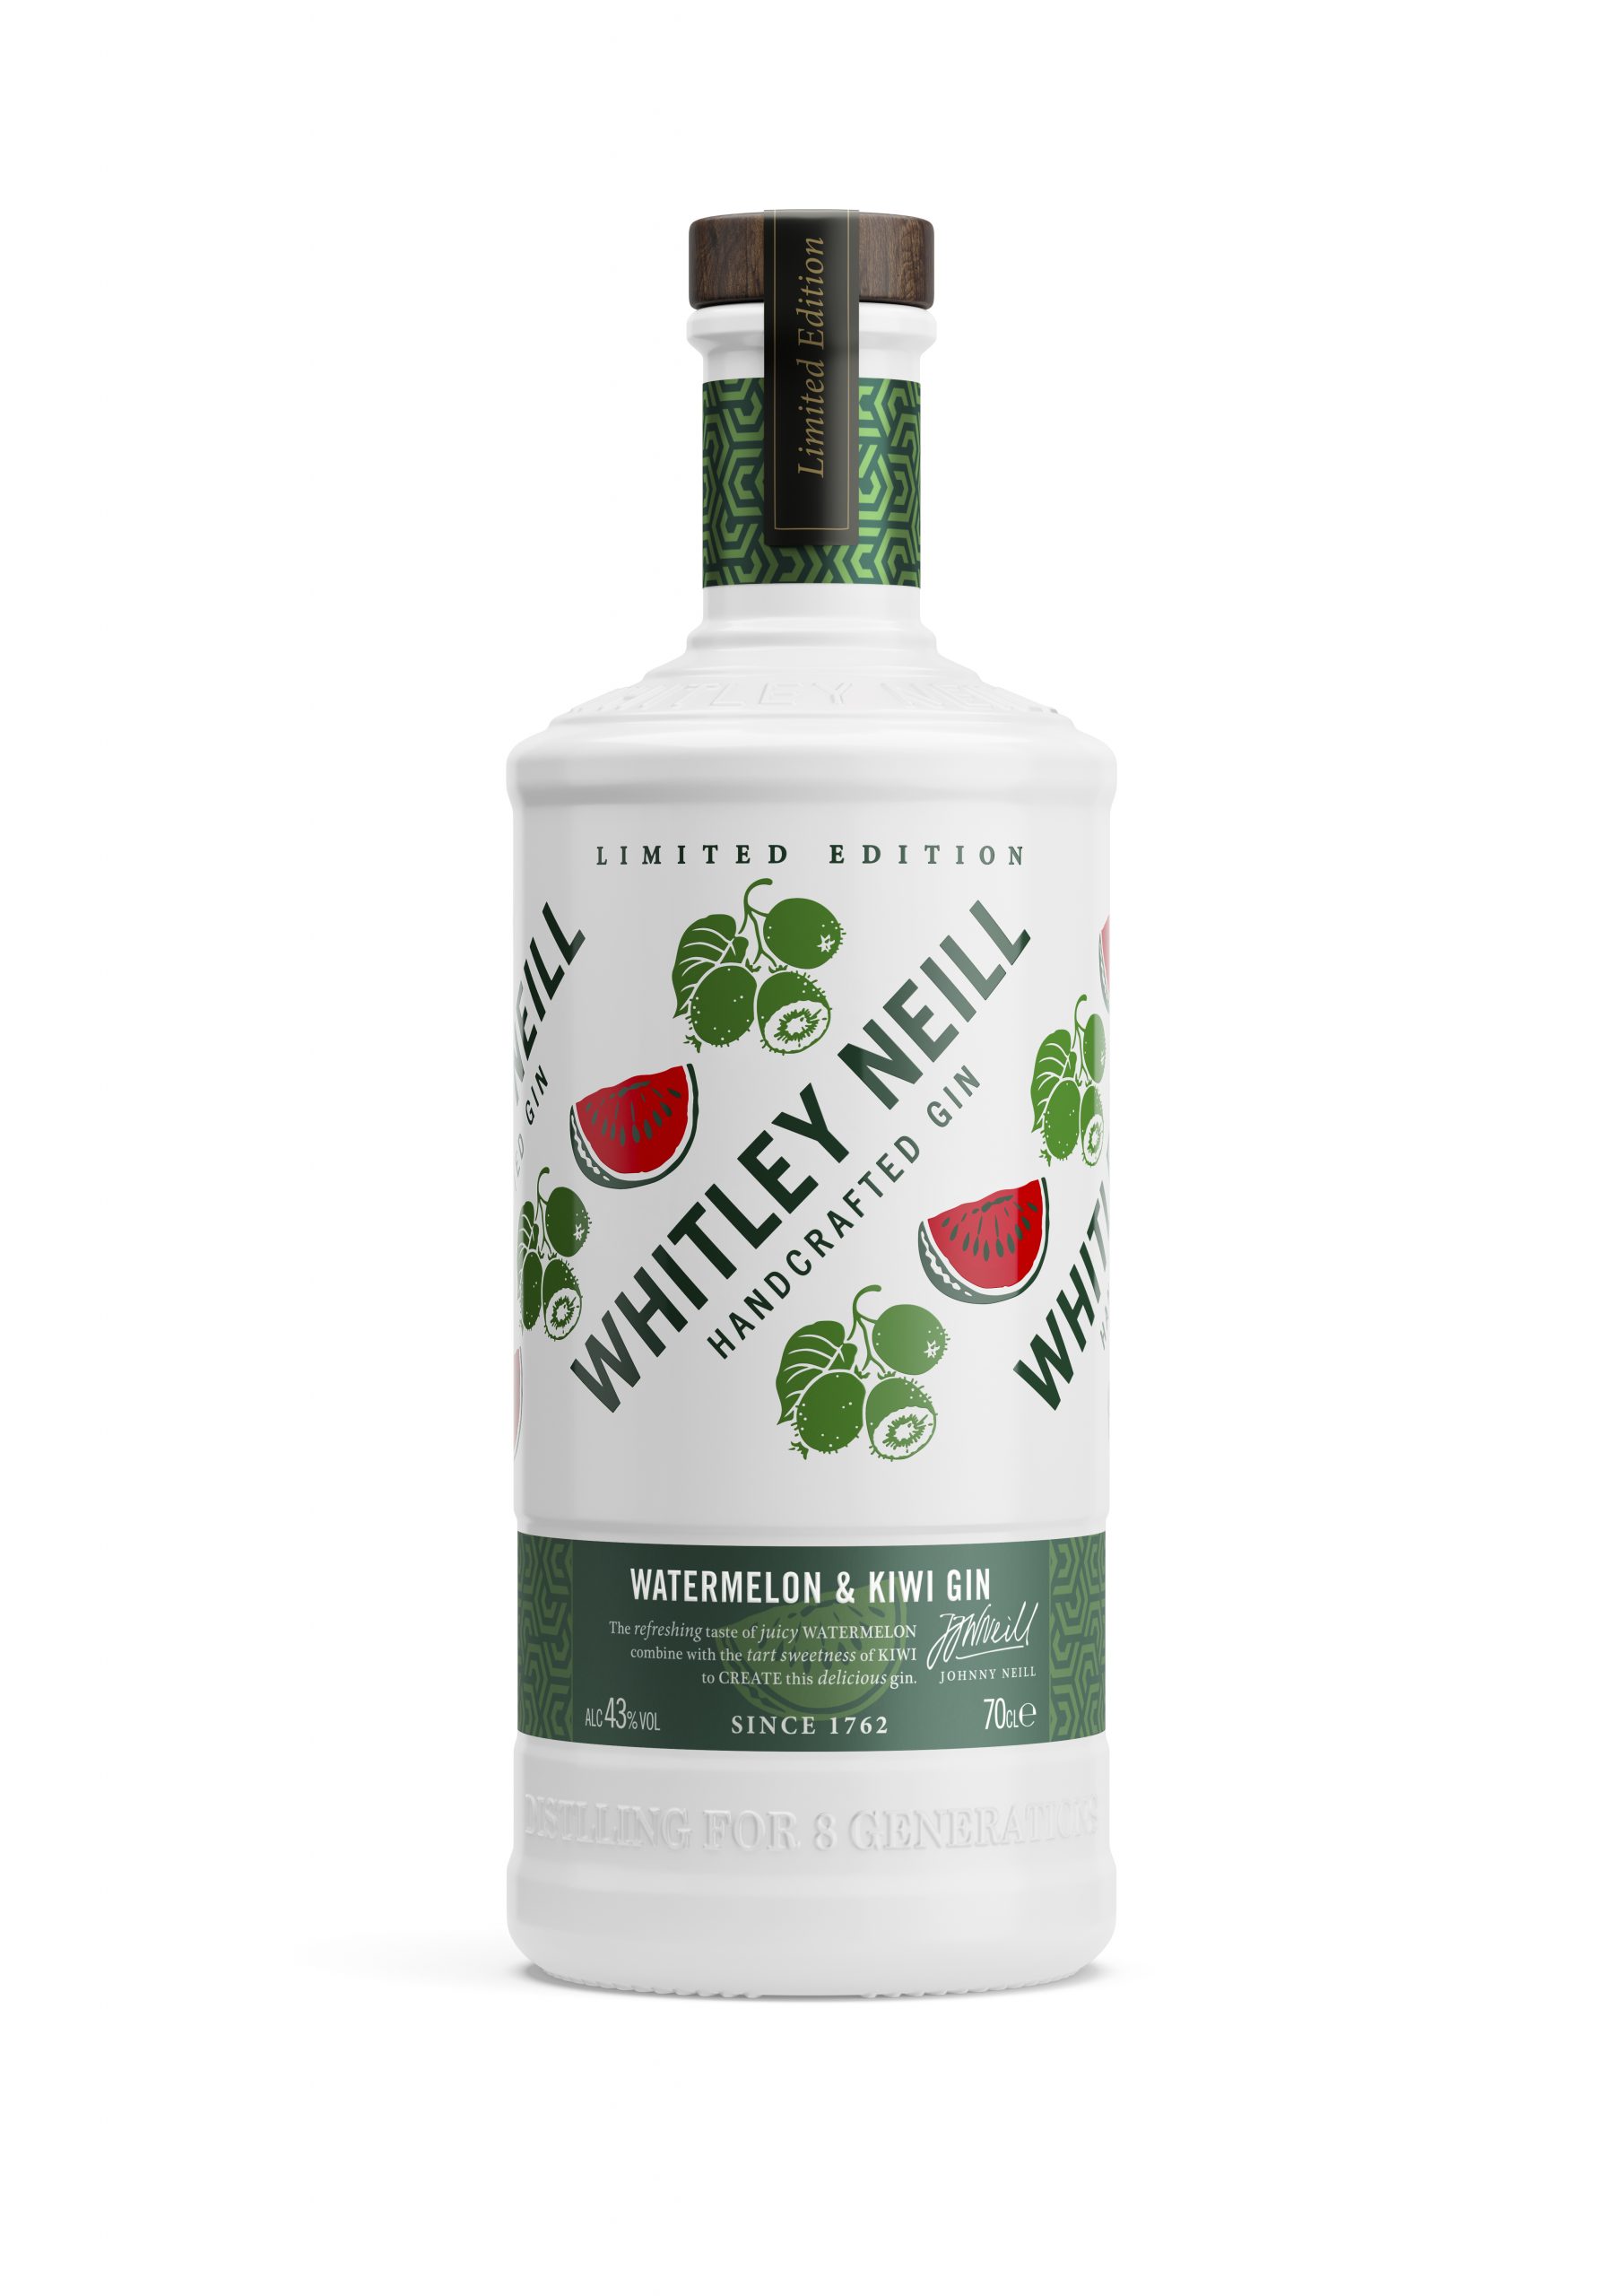 New Whitley Neill limited edition Watermelon & Kiwi Gin